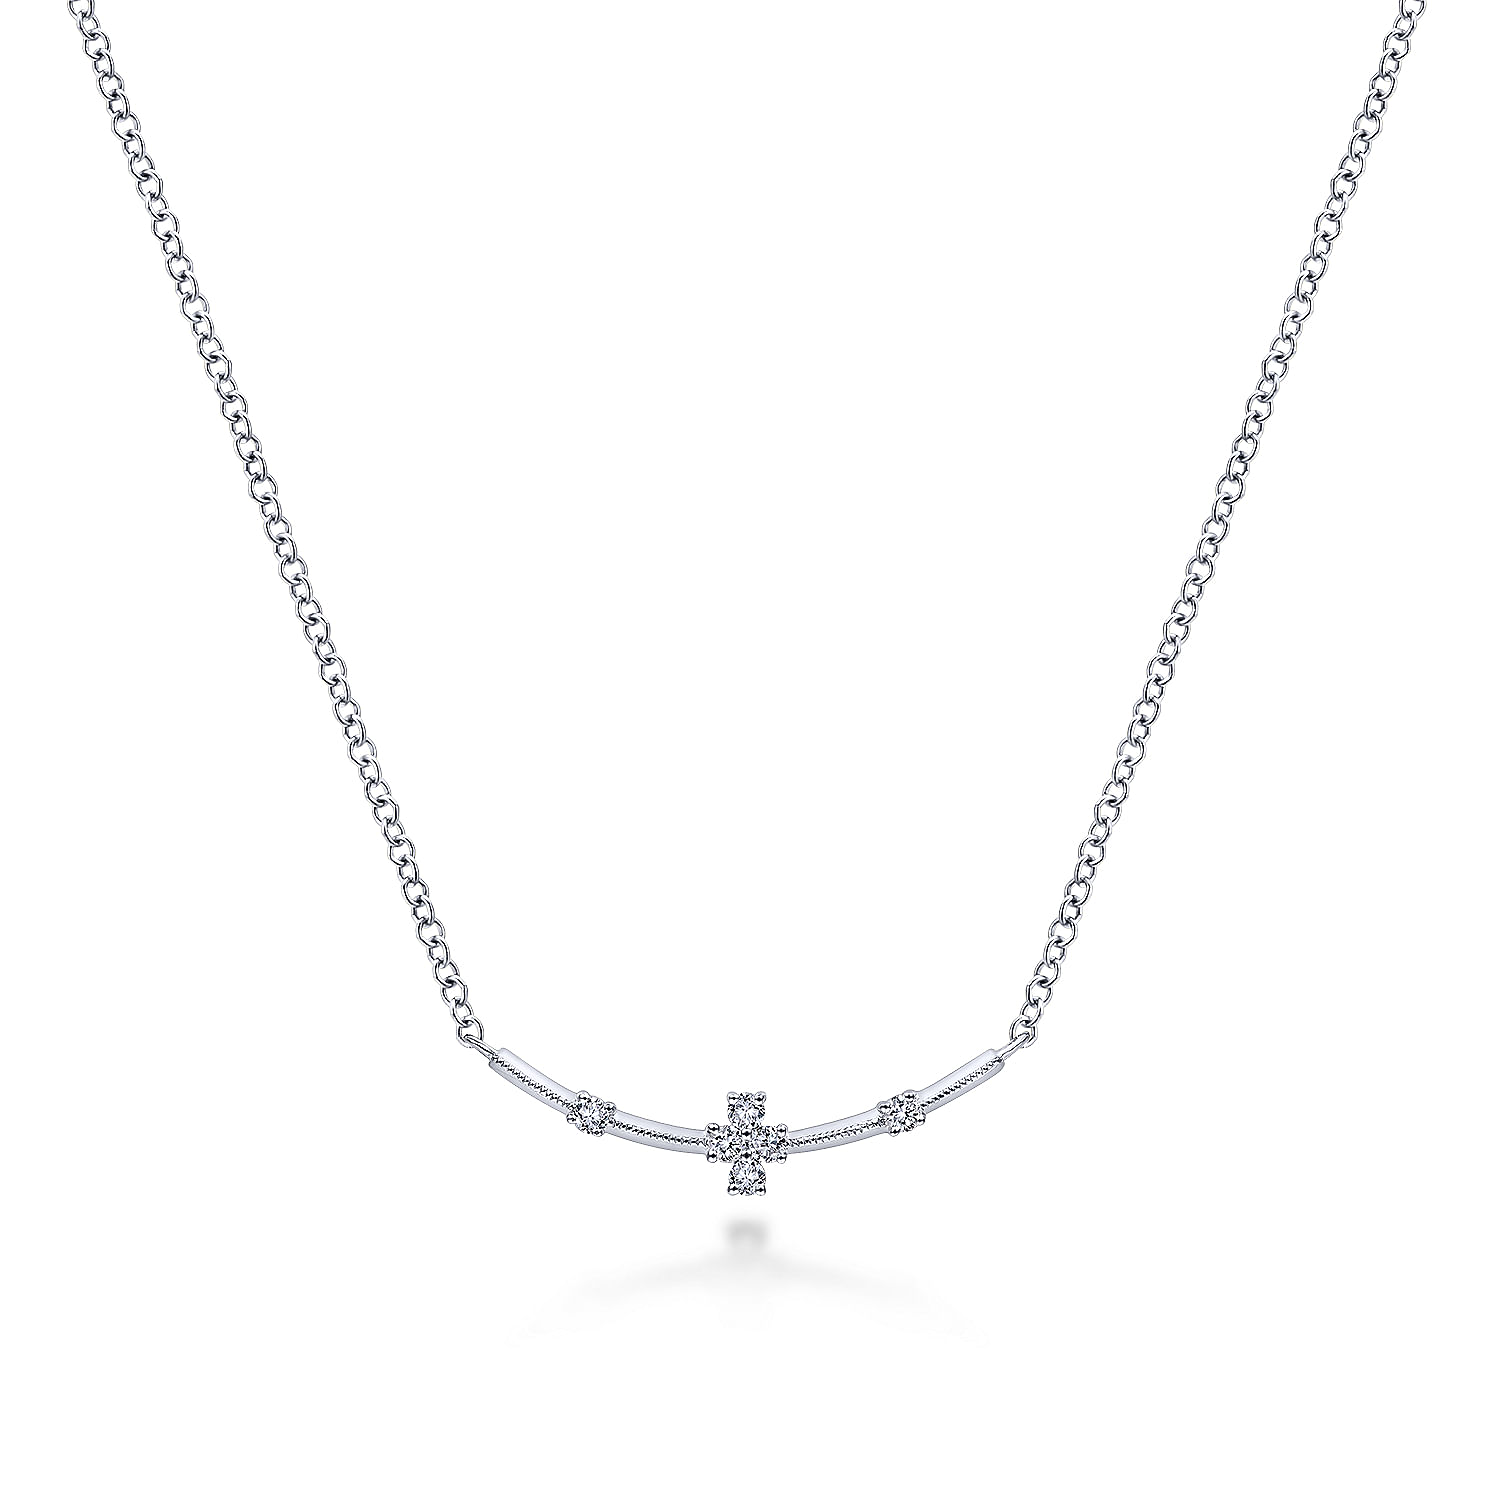 14K White Gold Curved Bar Necklace with Diamond Stations